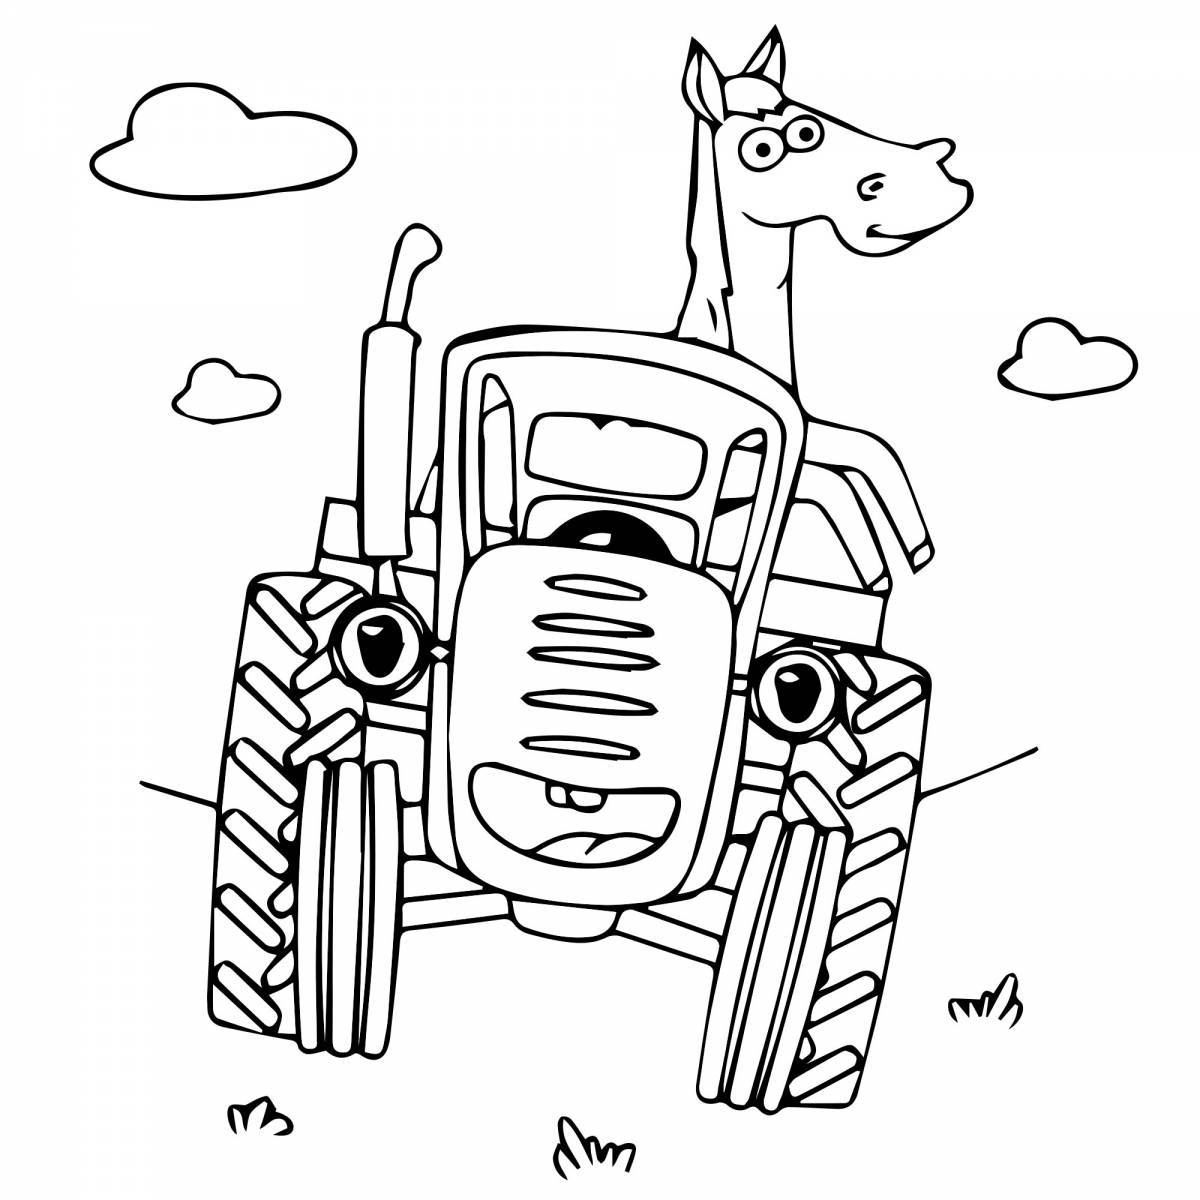 Adorable blue tractor coloring book for babies